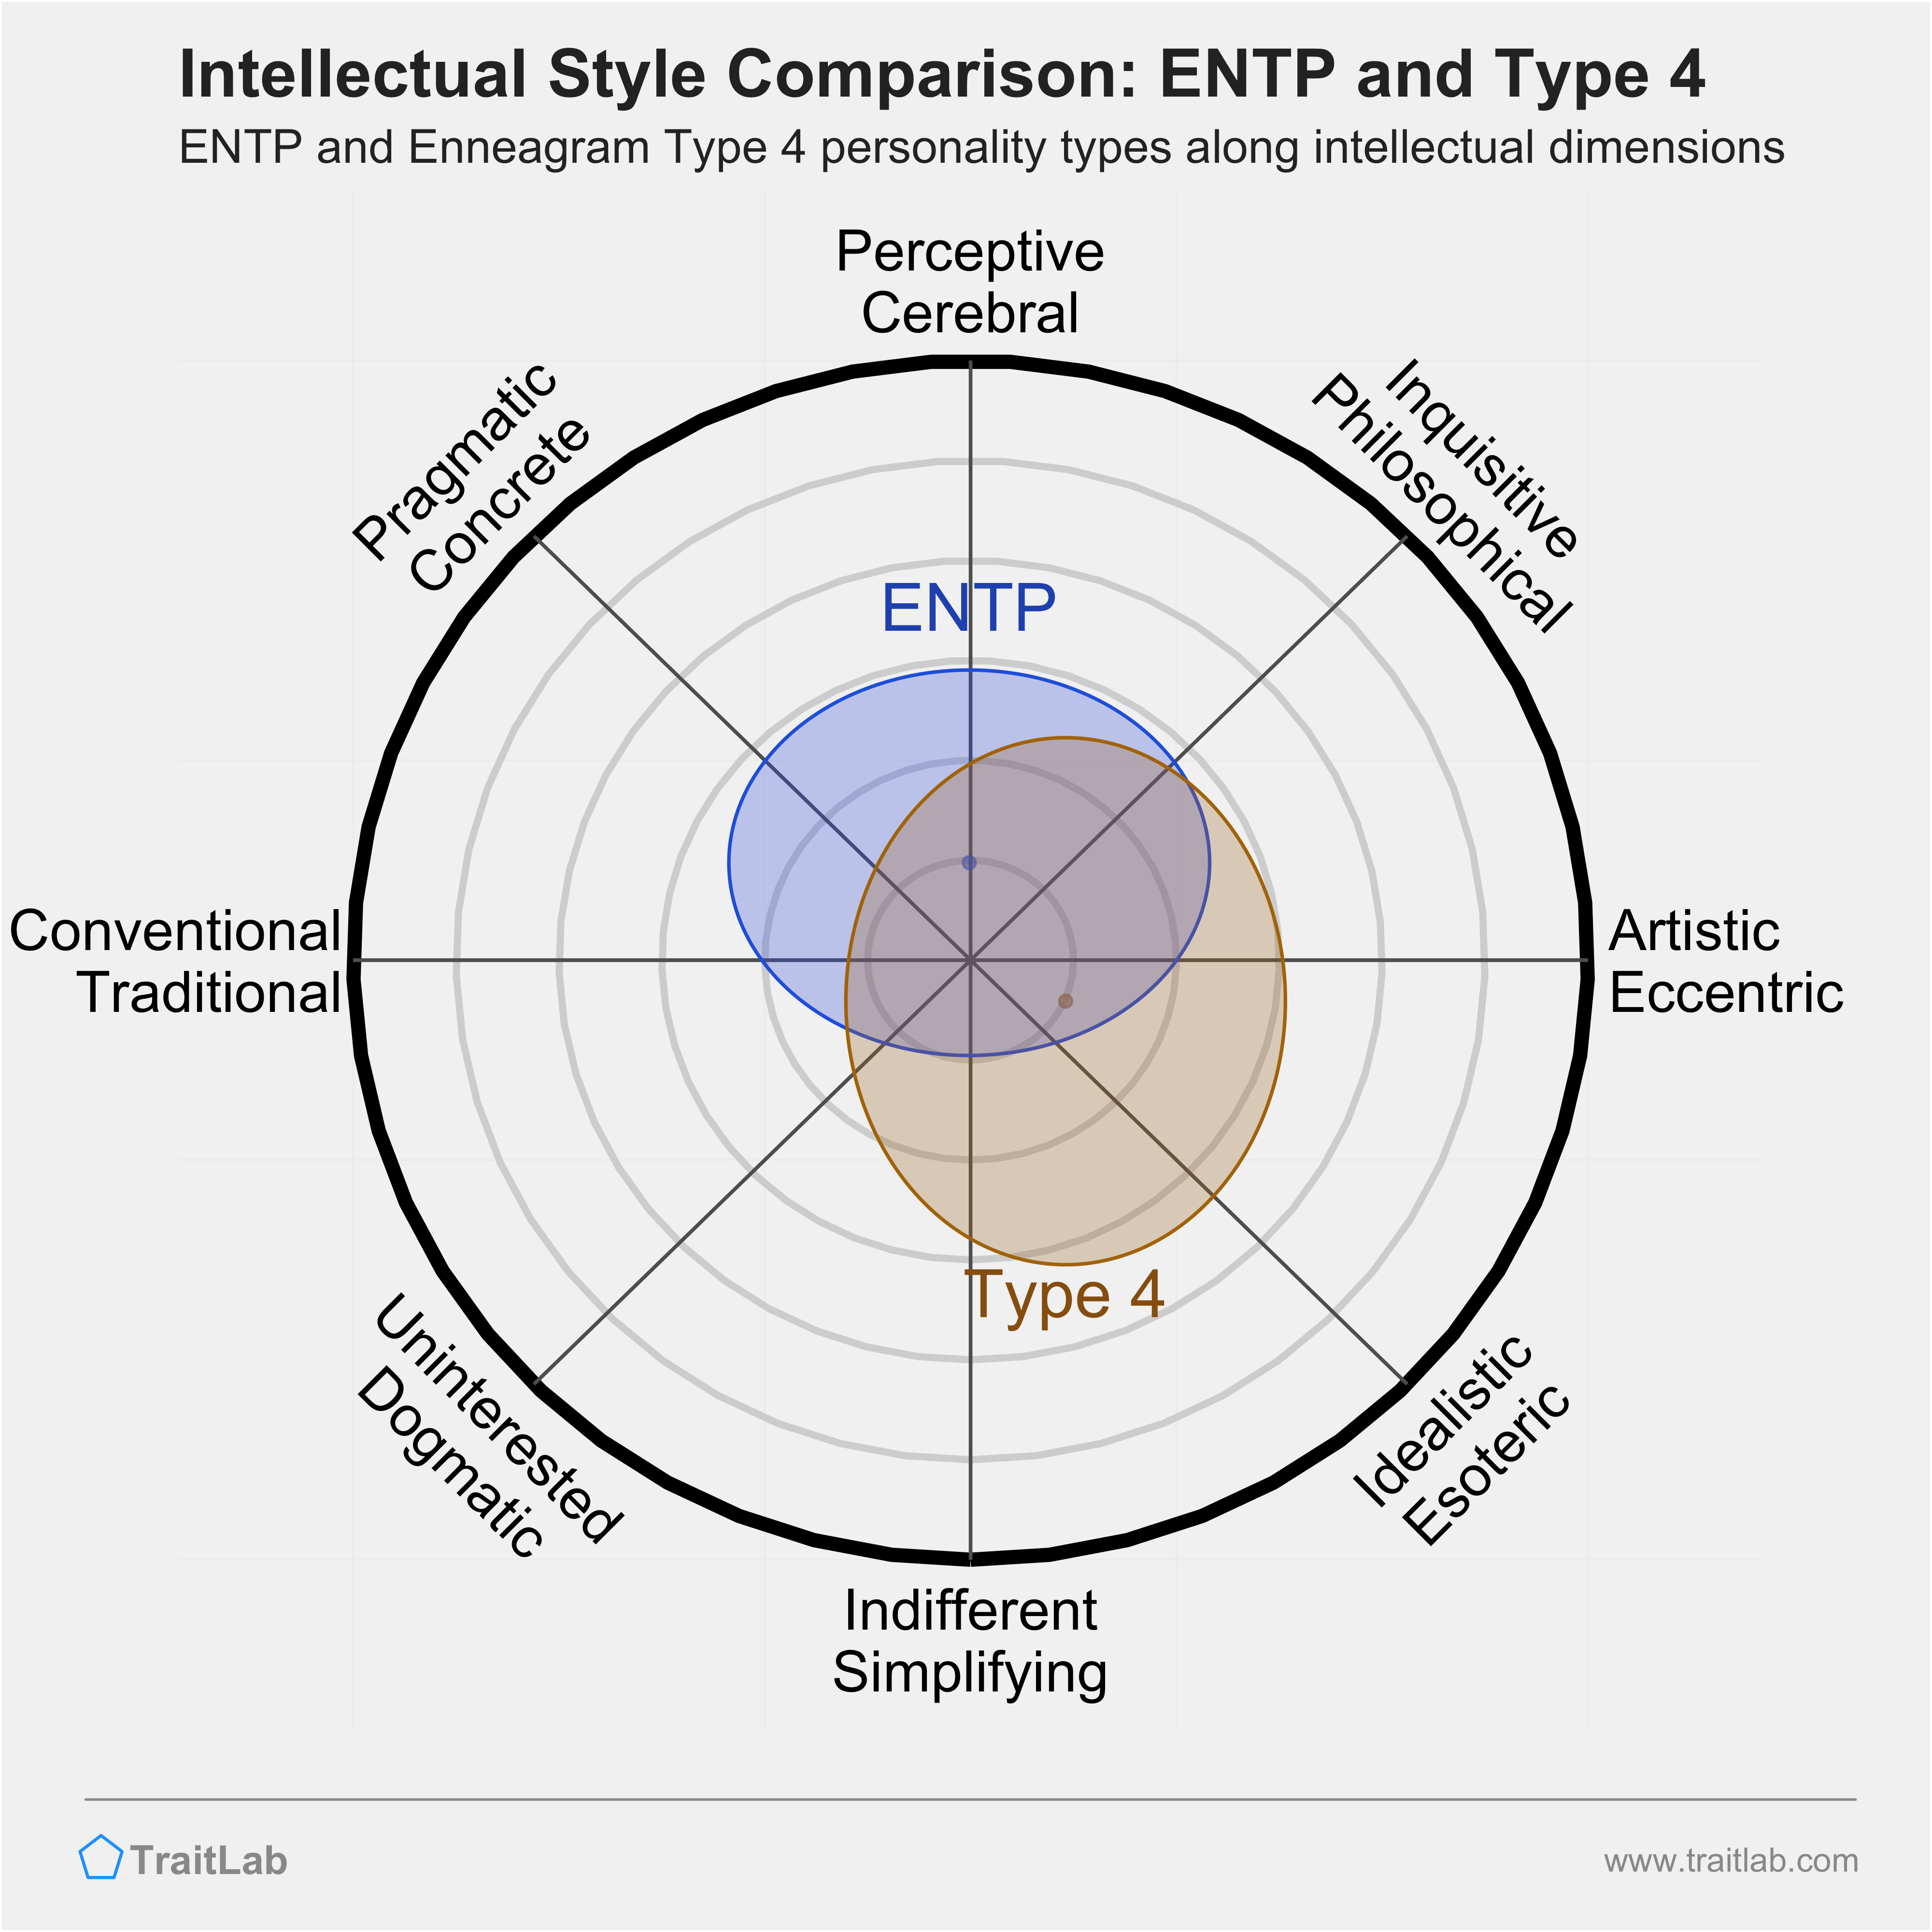 ENTP and Type 4 comparison across intellectual dimensions